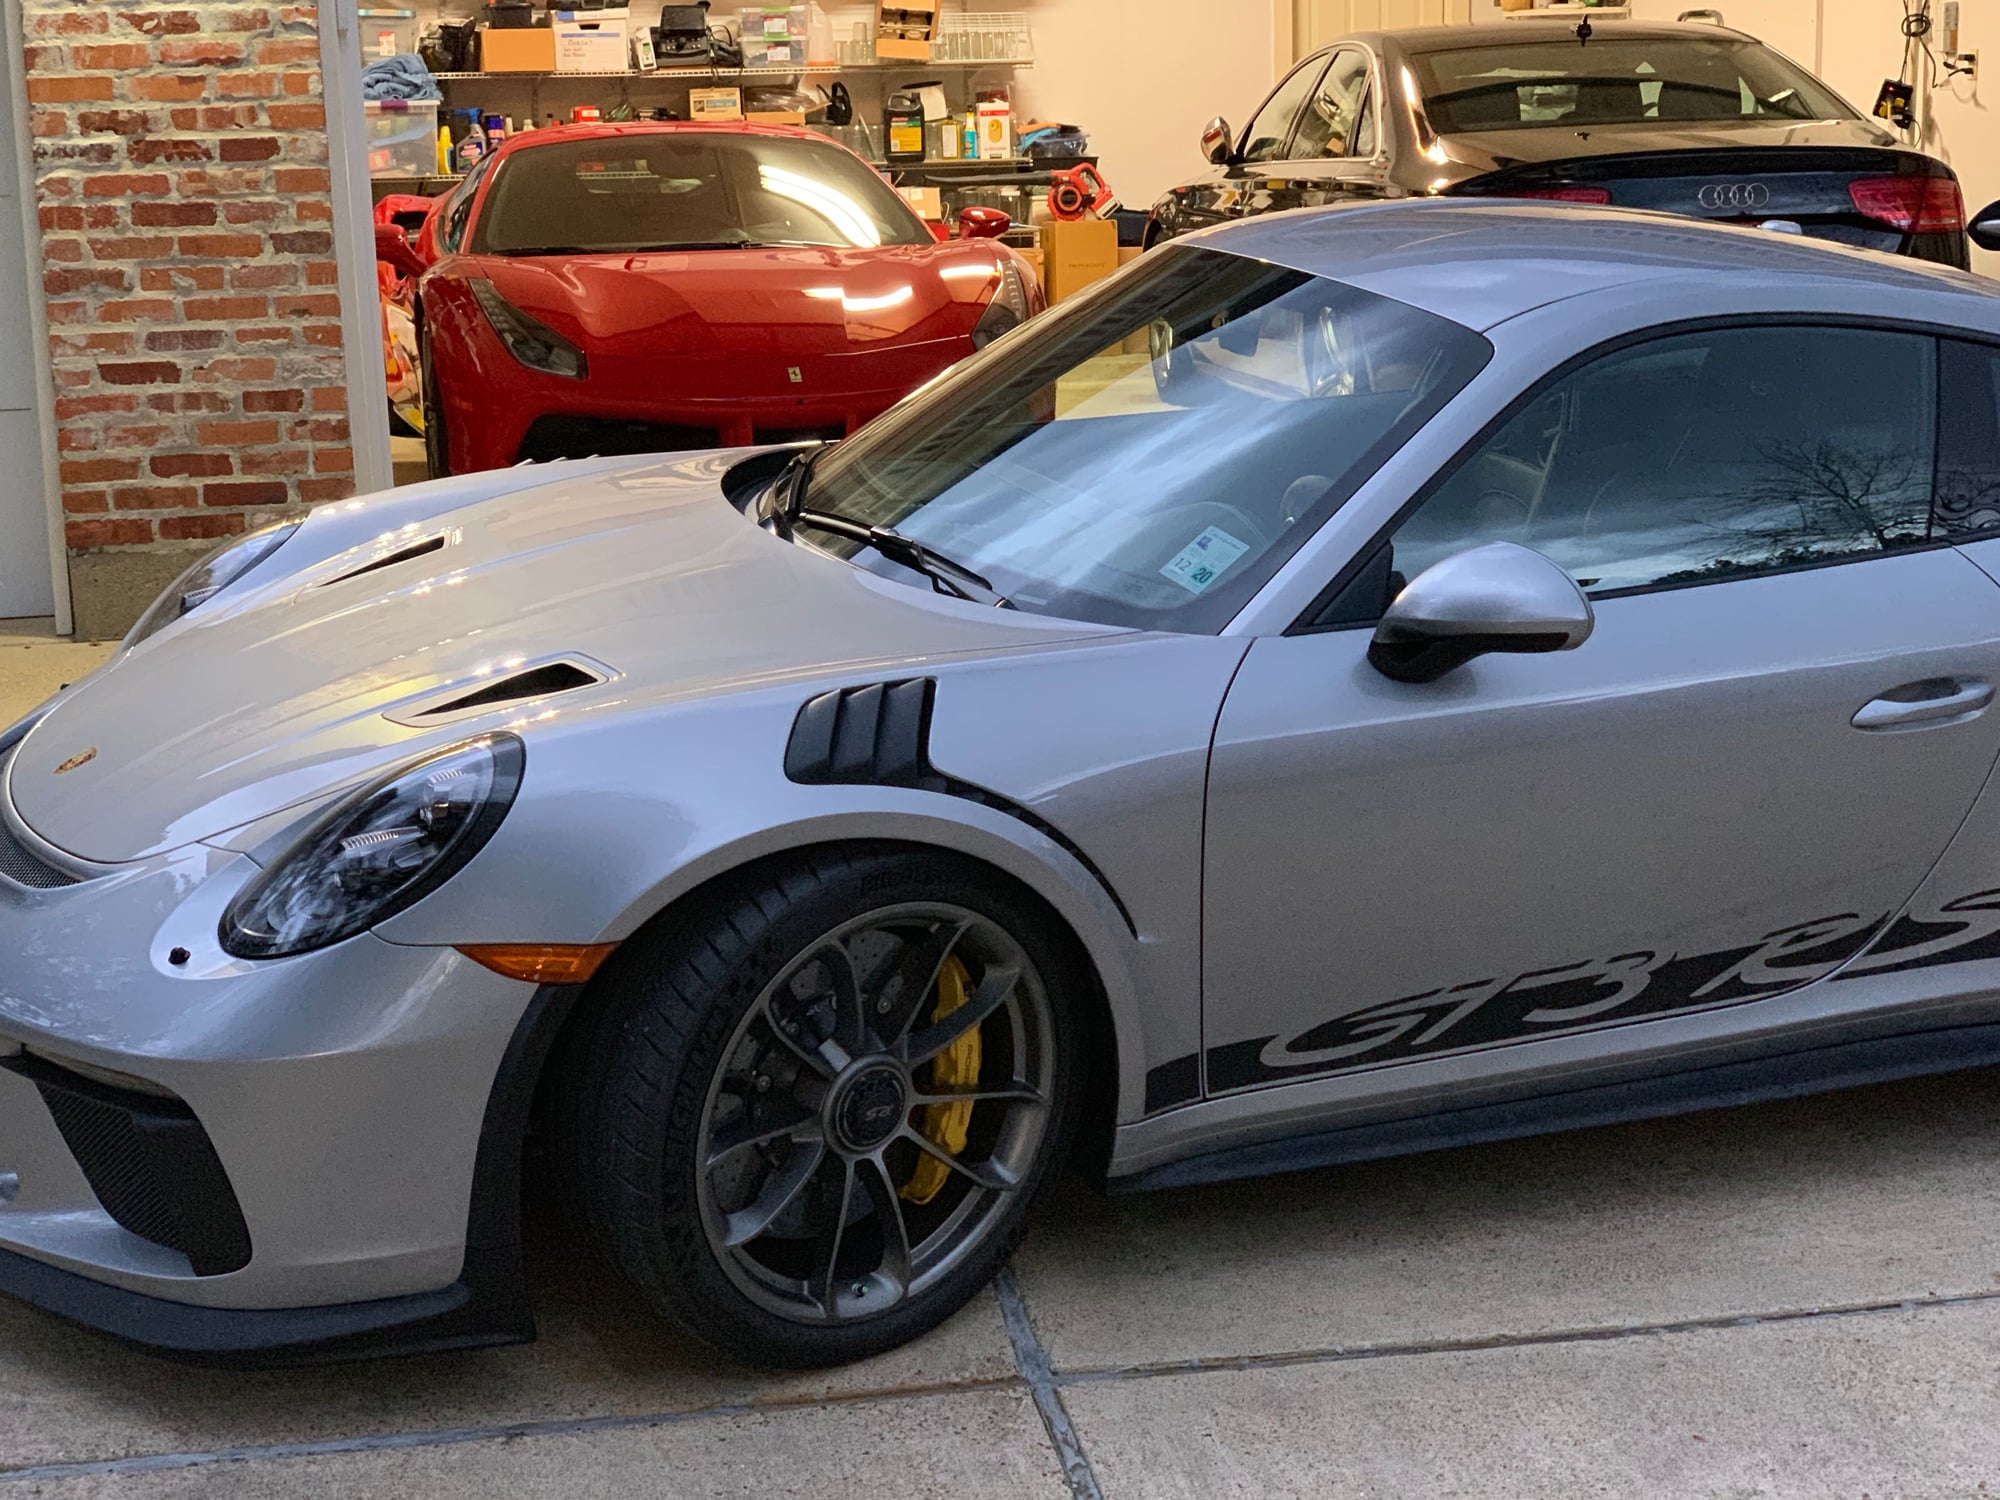 2019 Porsche GT3 - 2019 GT3RS - Used - VIN WP0AF2A93KS164944 - 906 Miles - 6 cyl - 2WD - Automatic - Coupe - Silver - Shreveport, LA 71106, United States